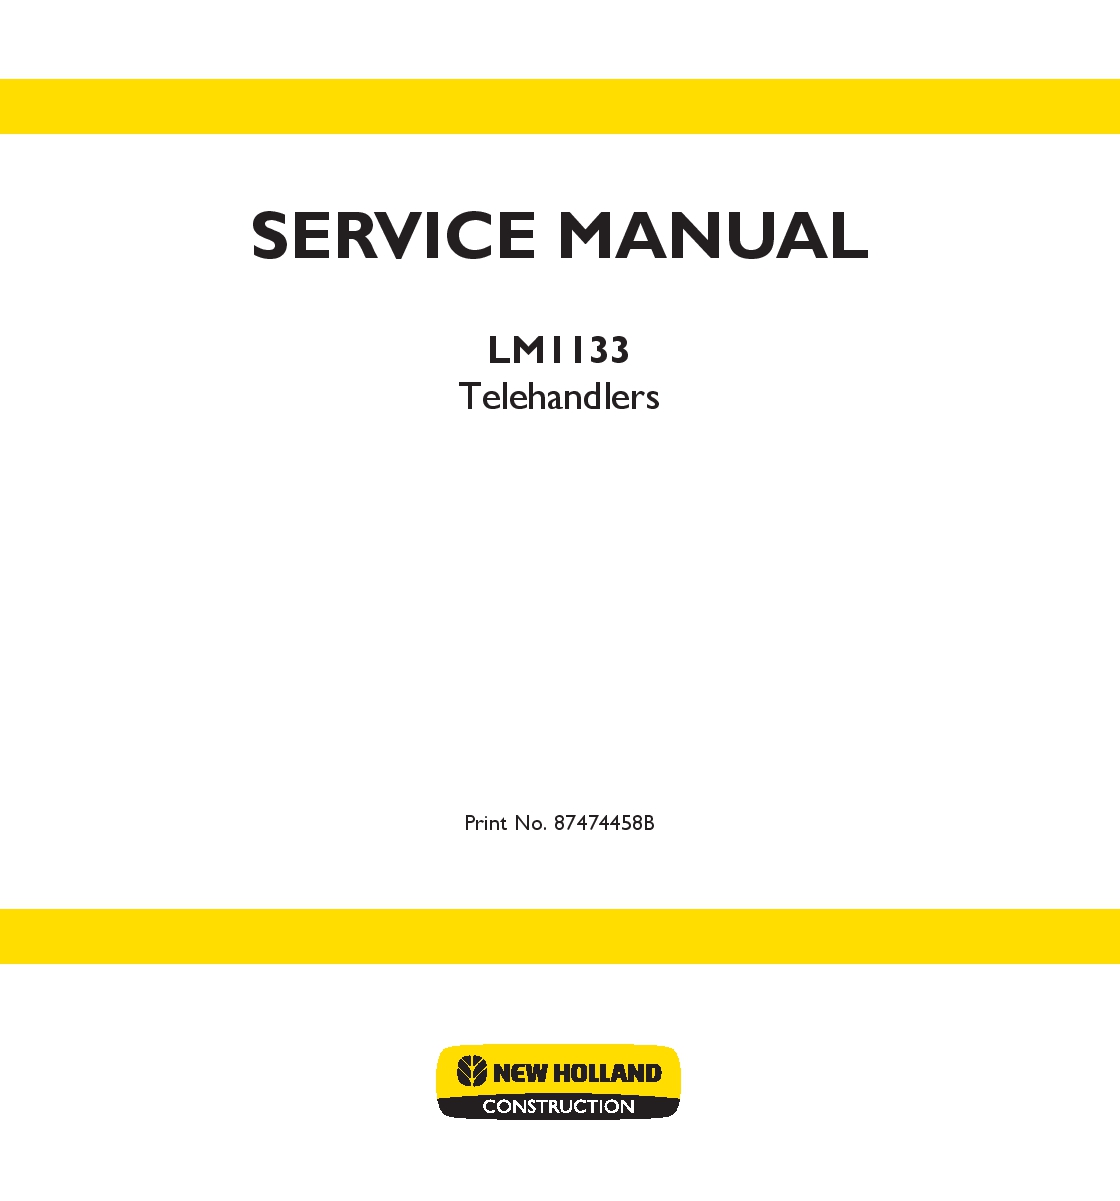 New Holland Manual Download